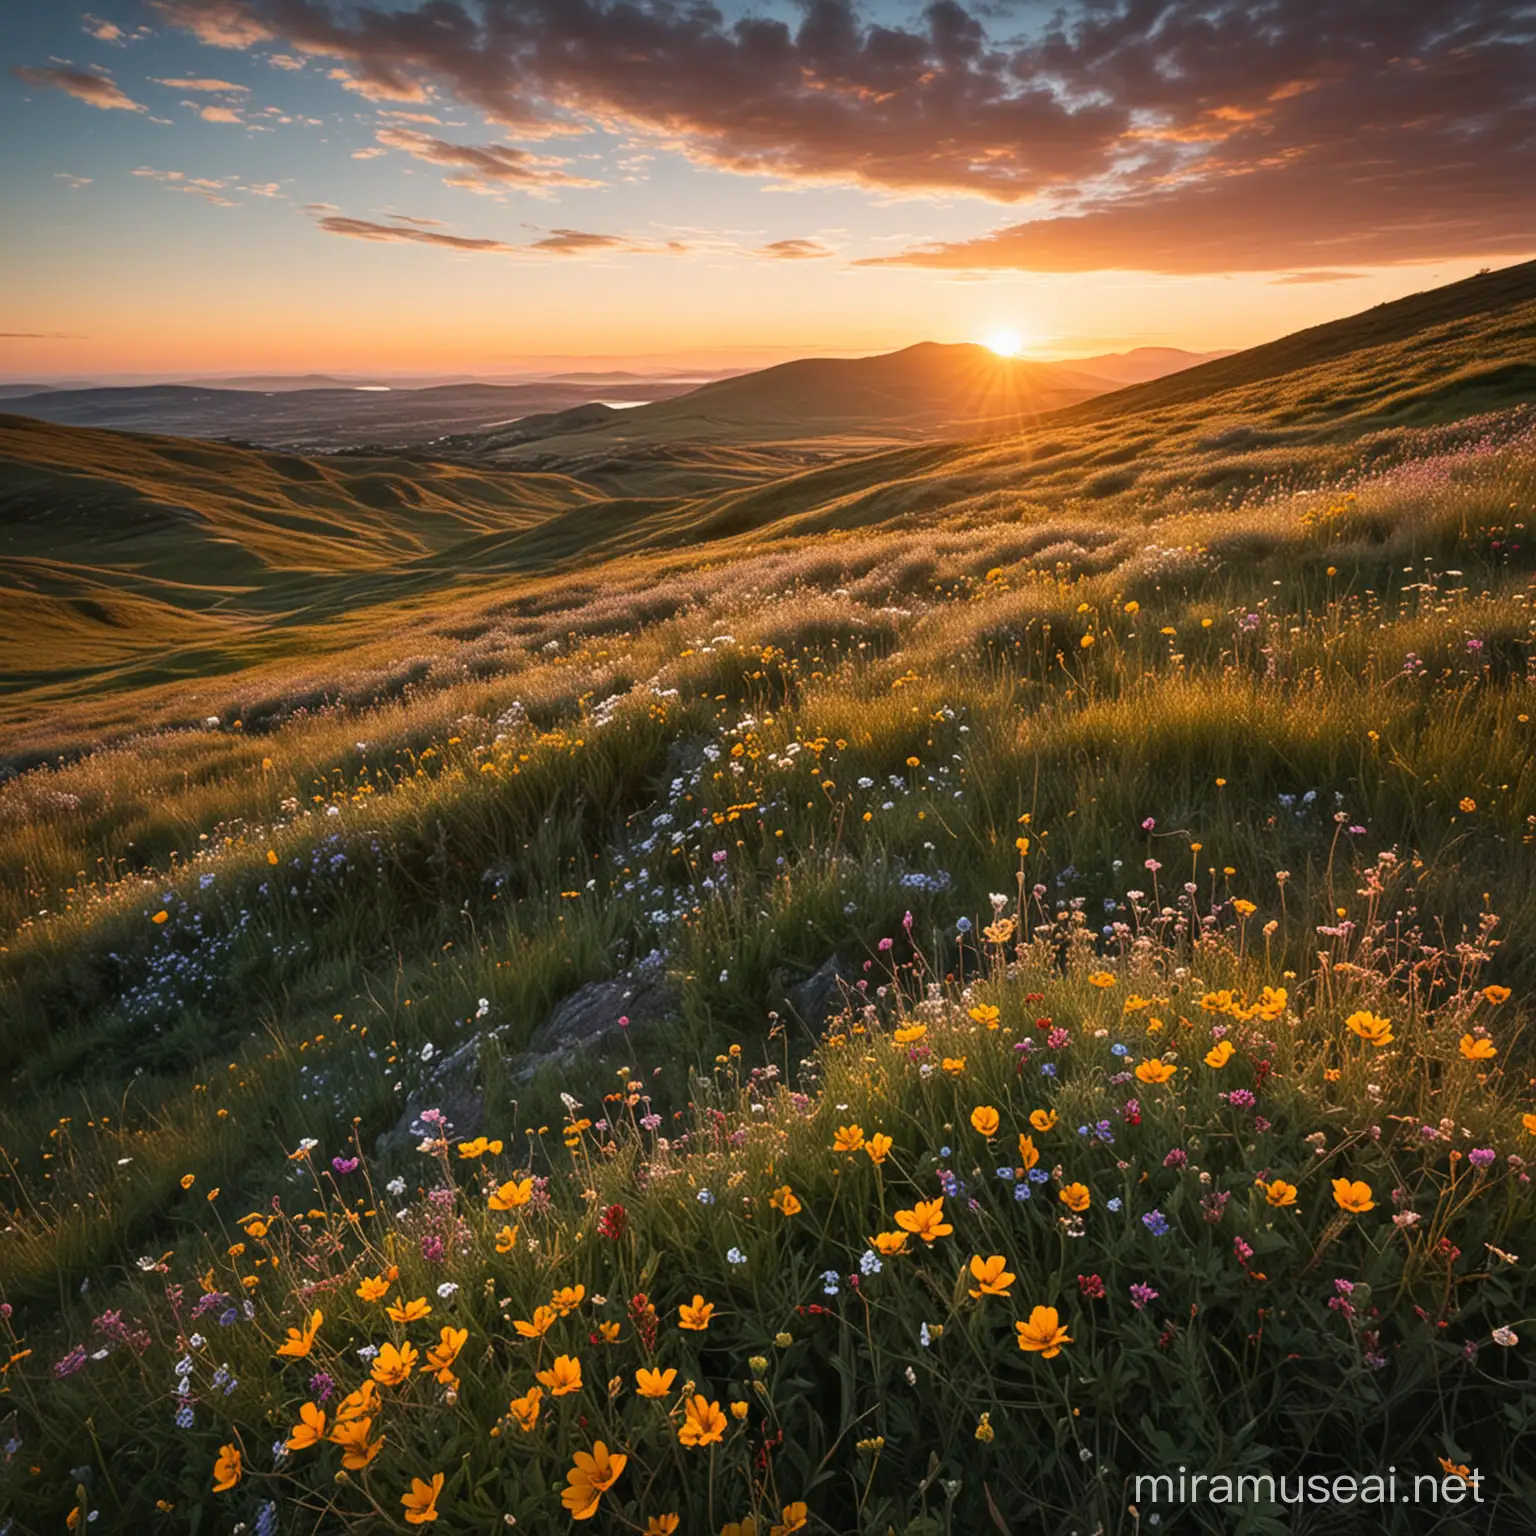 Vibrant Wild Flowers Dancing in Sunset Breeze on Rolling Hills